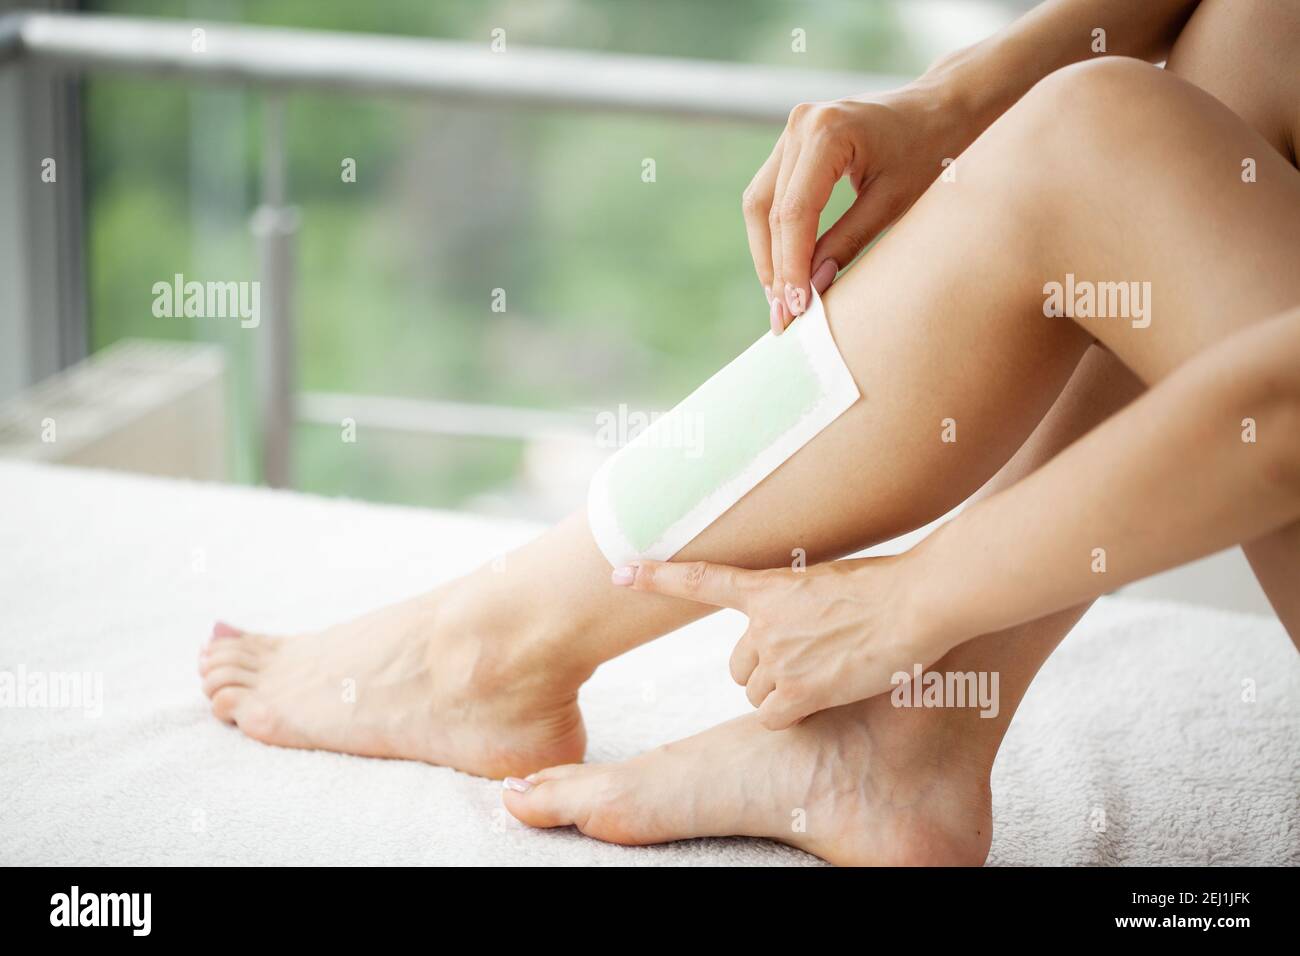 Woman uses wax tape to remove hair on legs Stock Photo - Alamy